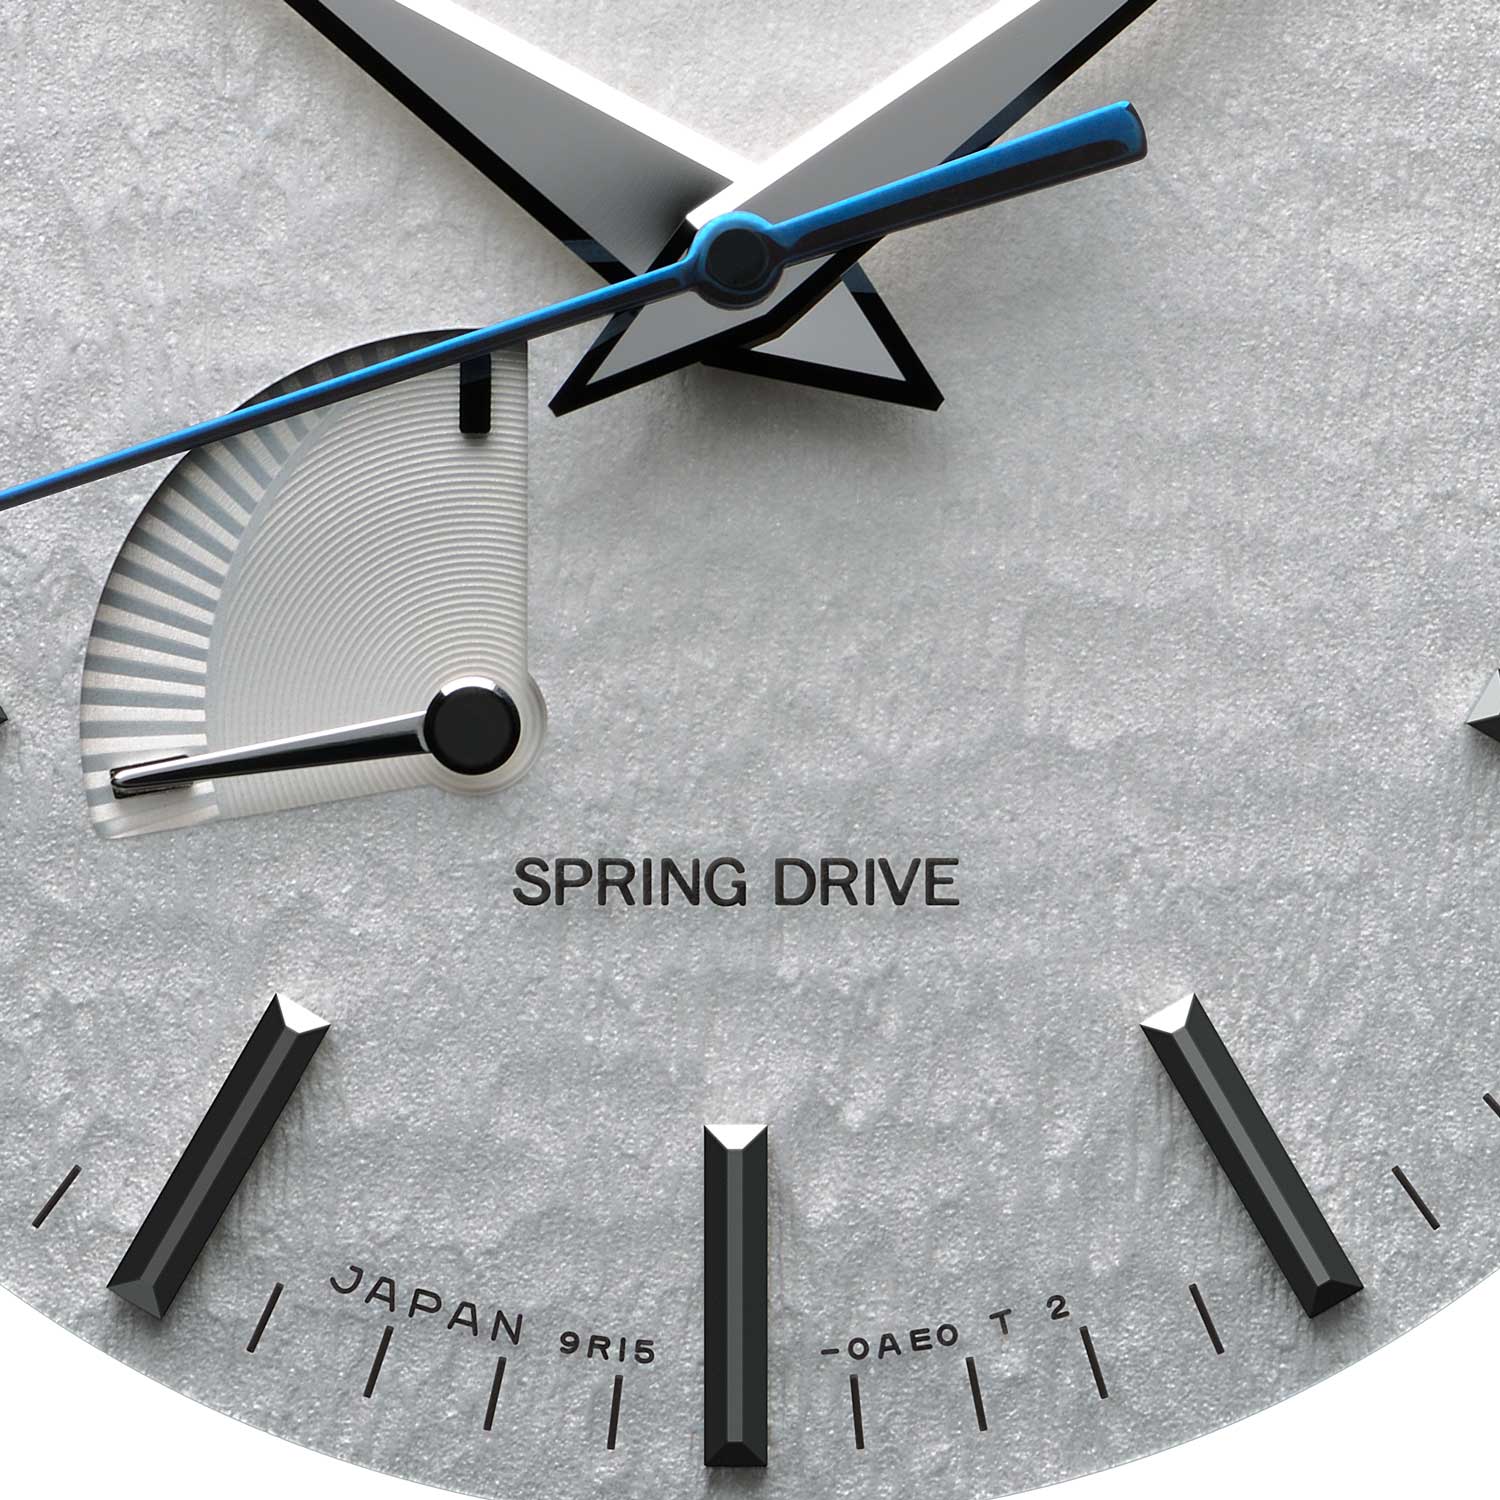 The incredible ‘Snowflake’ dial of the Grand Seiko Spring Drive ‘Snowflake’ SBGA211 (Image: Grand Seiko)